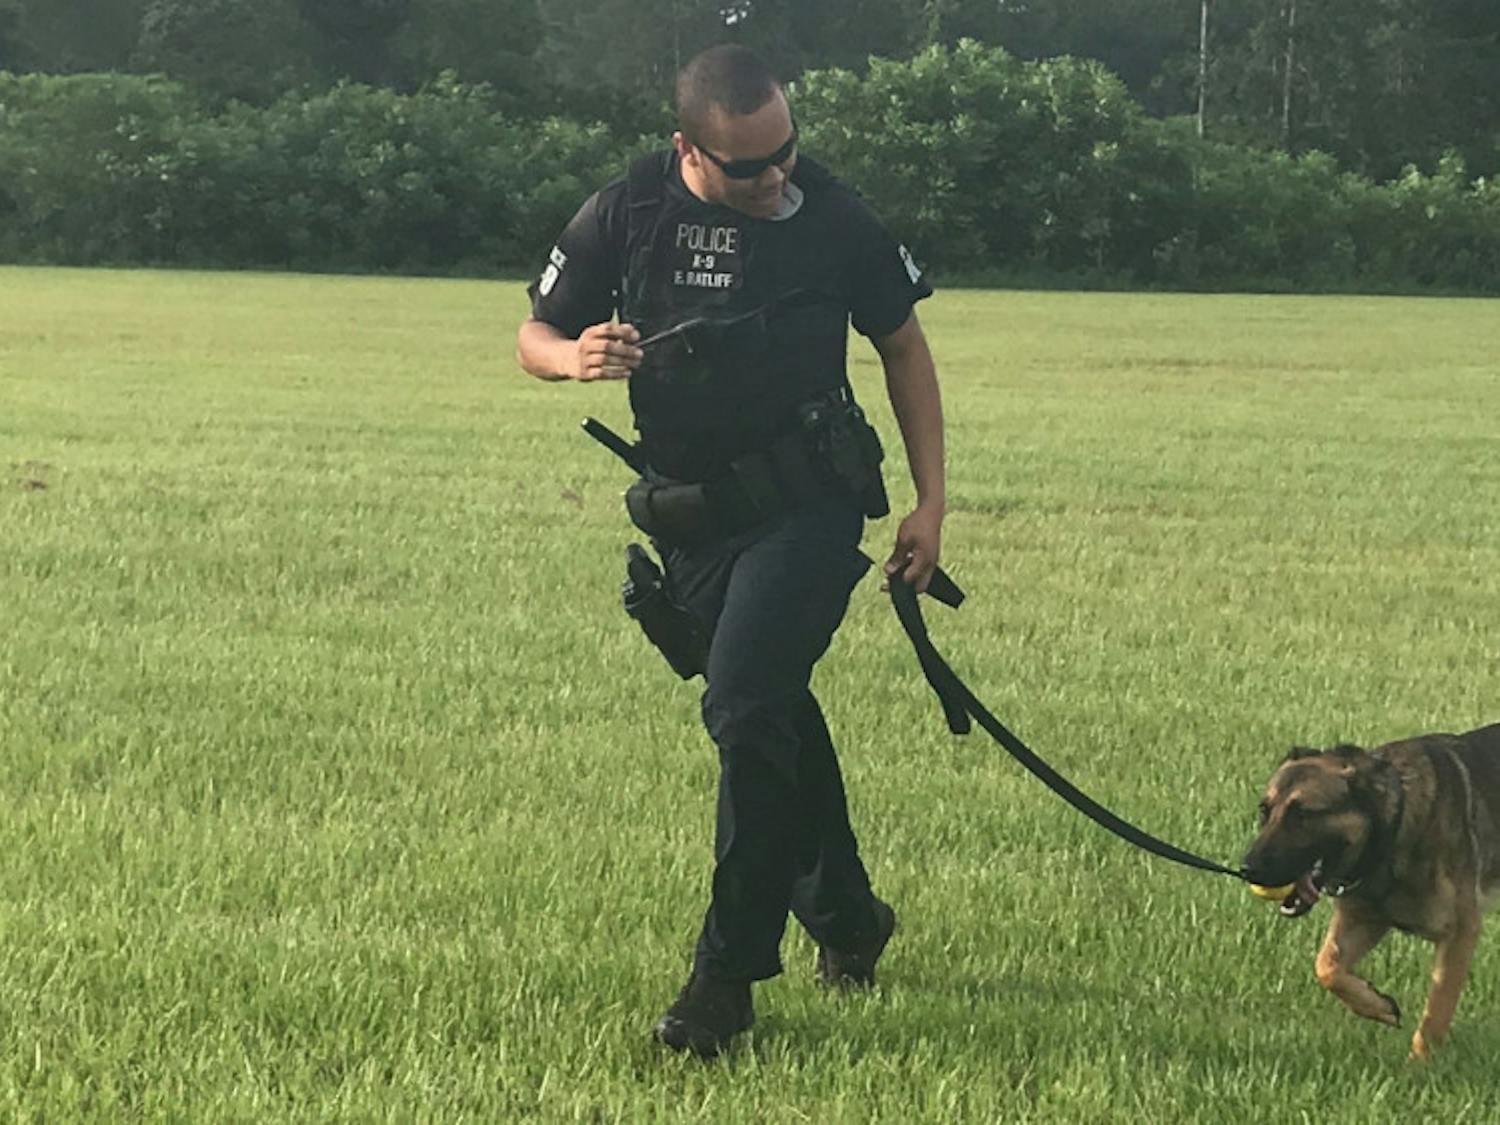 Officer Ed Ratliff and his dog, Ace, run off the field after doing apprehension training. Another officer wore a sleeve for Ace to safely bite down on his forearm.